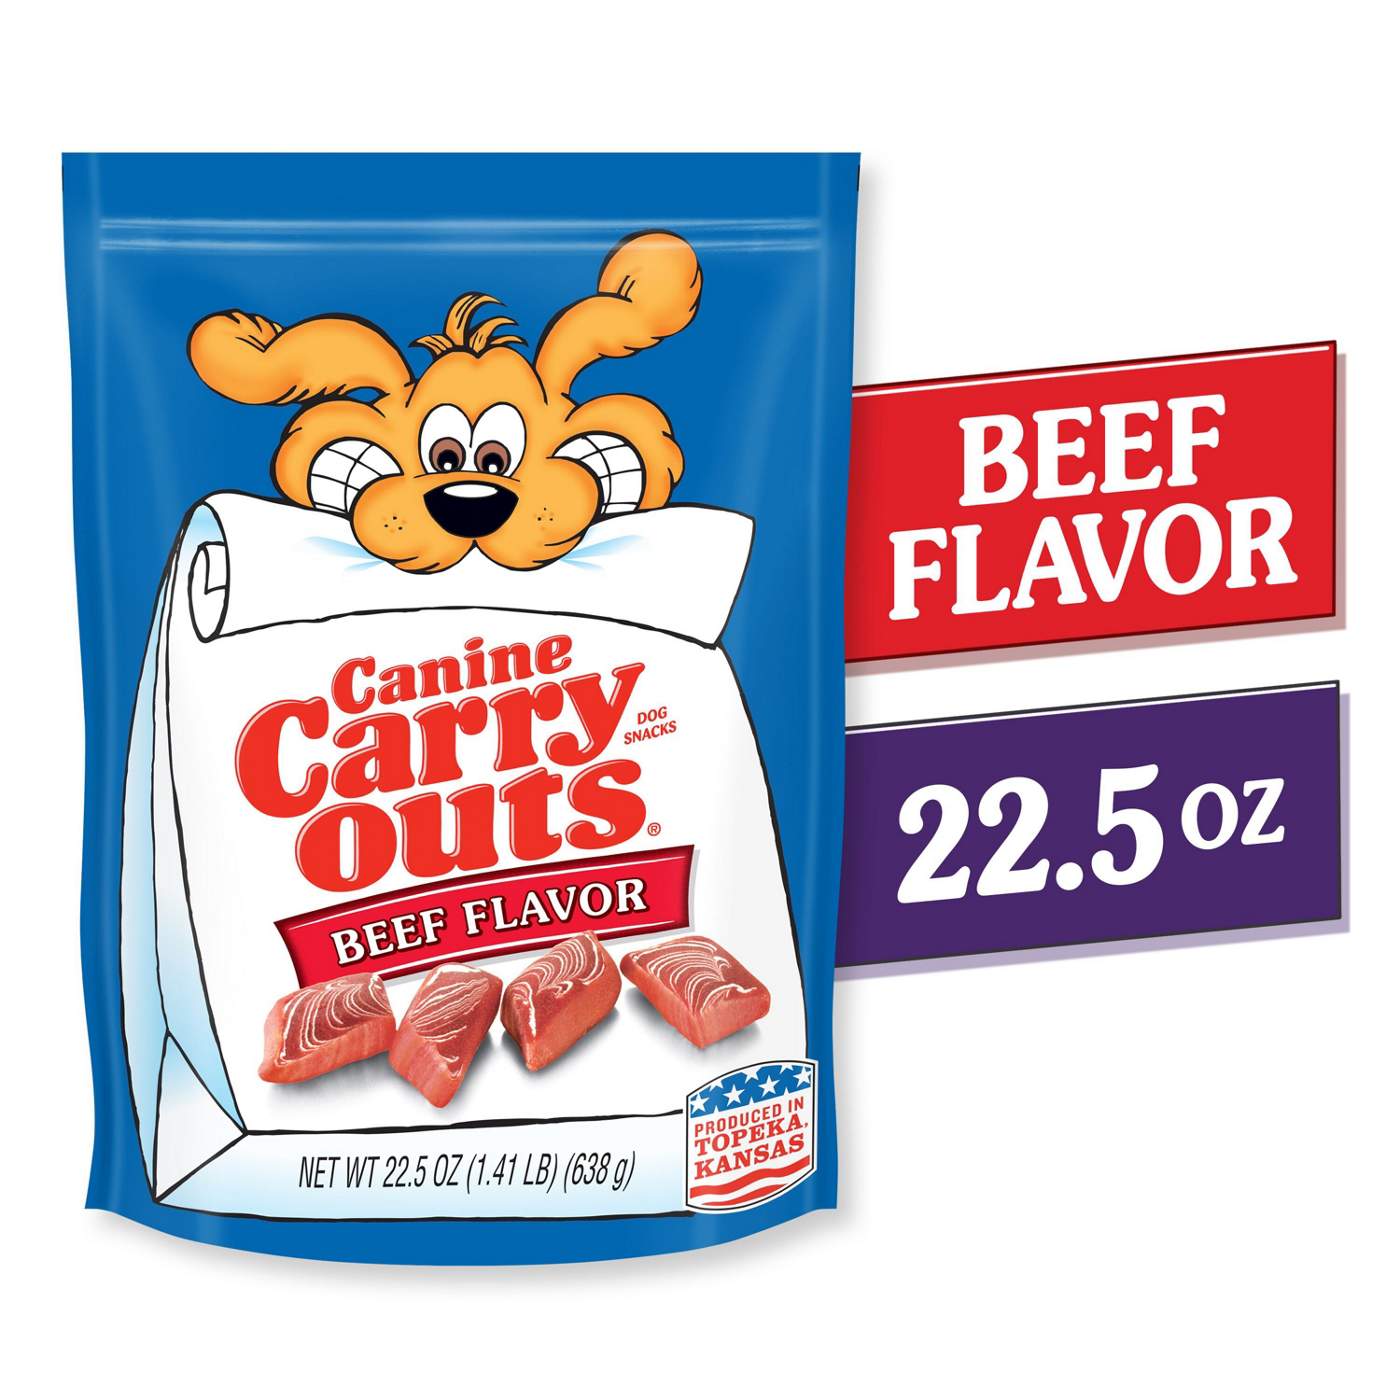 Canine Carry Outs Beef Flavor Dog Treats; image 3 of 4